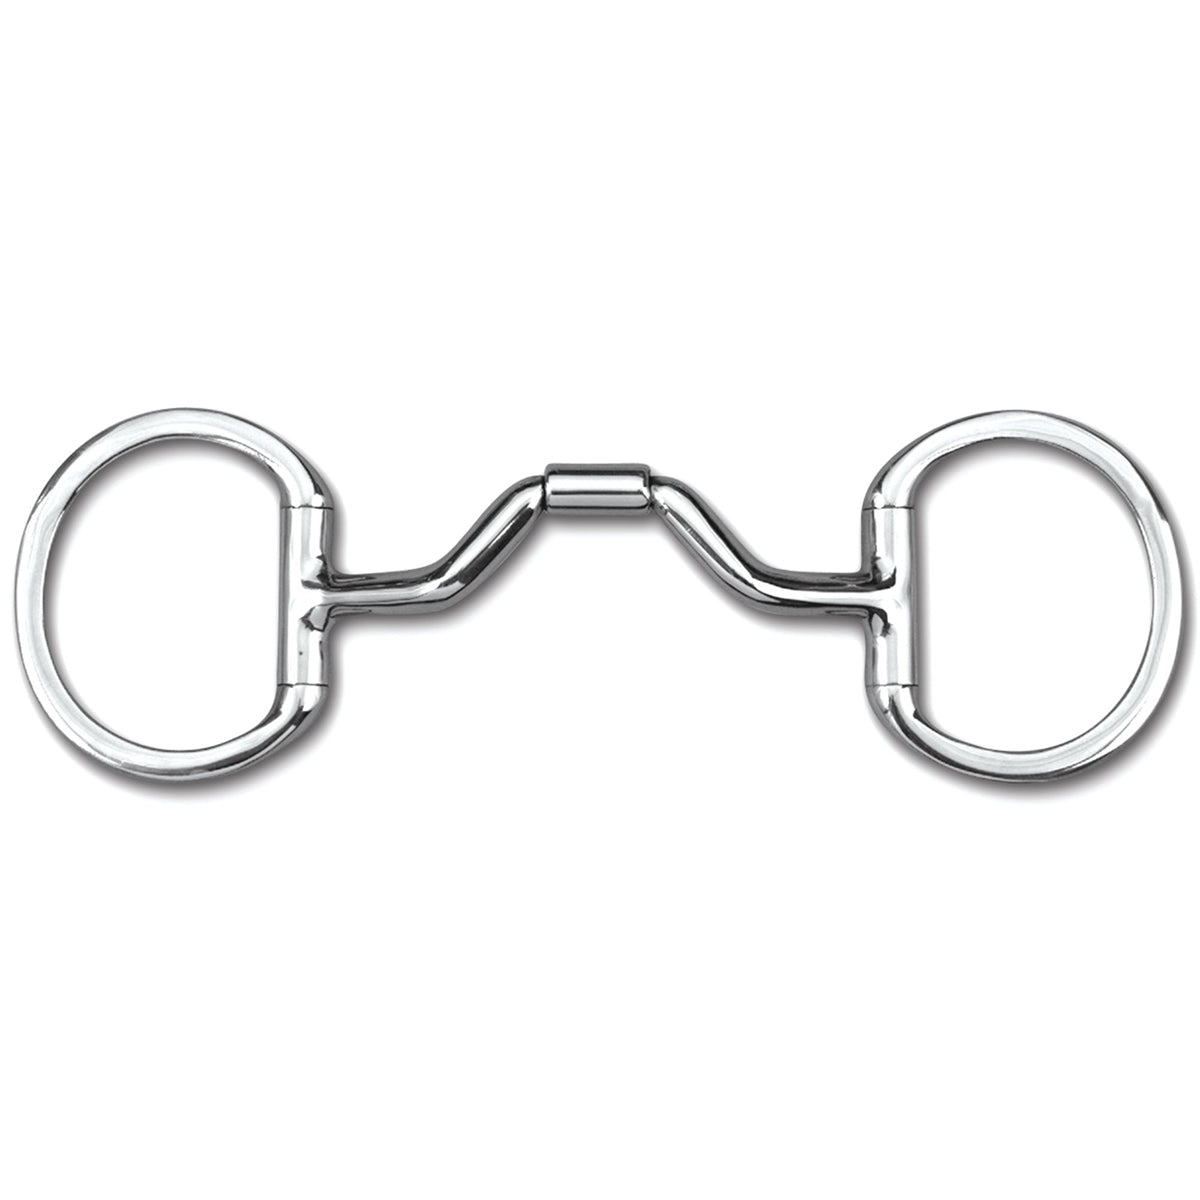 Myler Eggbutt without Hooks with Stainless Steel Ported Barrel Snaffle MB 33